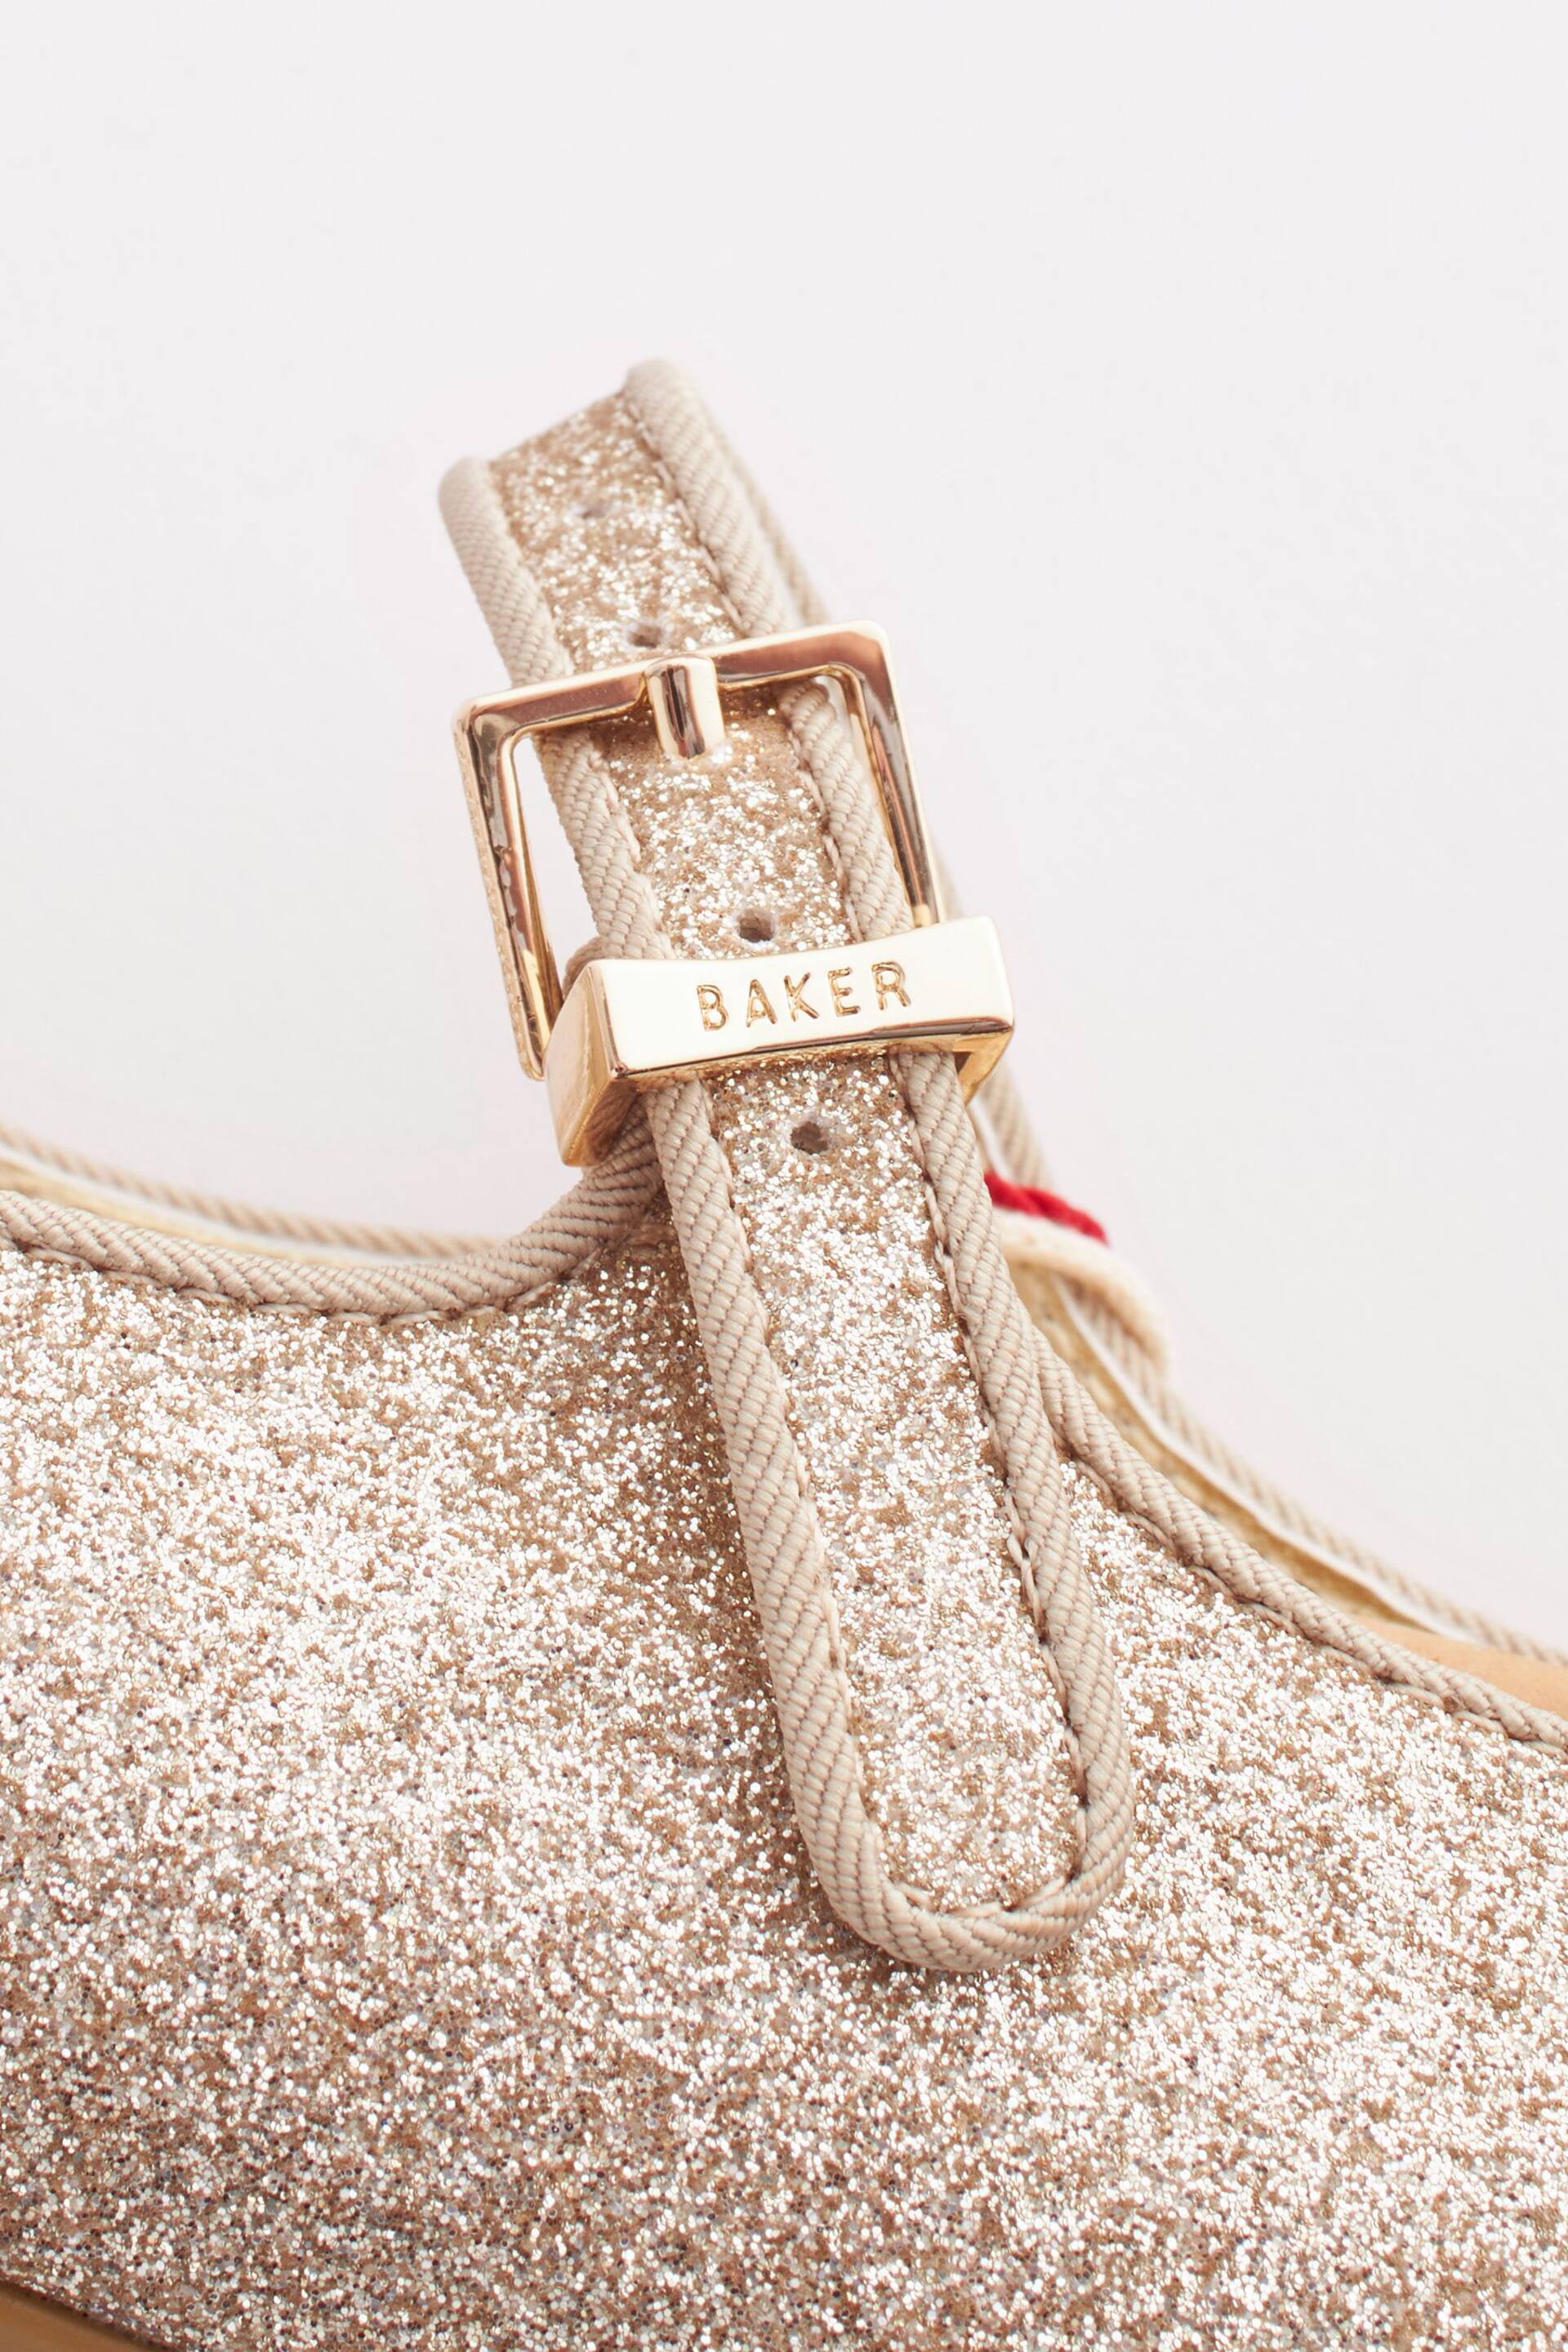 Baker by Ted Baker Girls Gold Glitter Shoes with Rhinestone Bow - Image 6 of 6